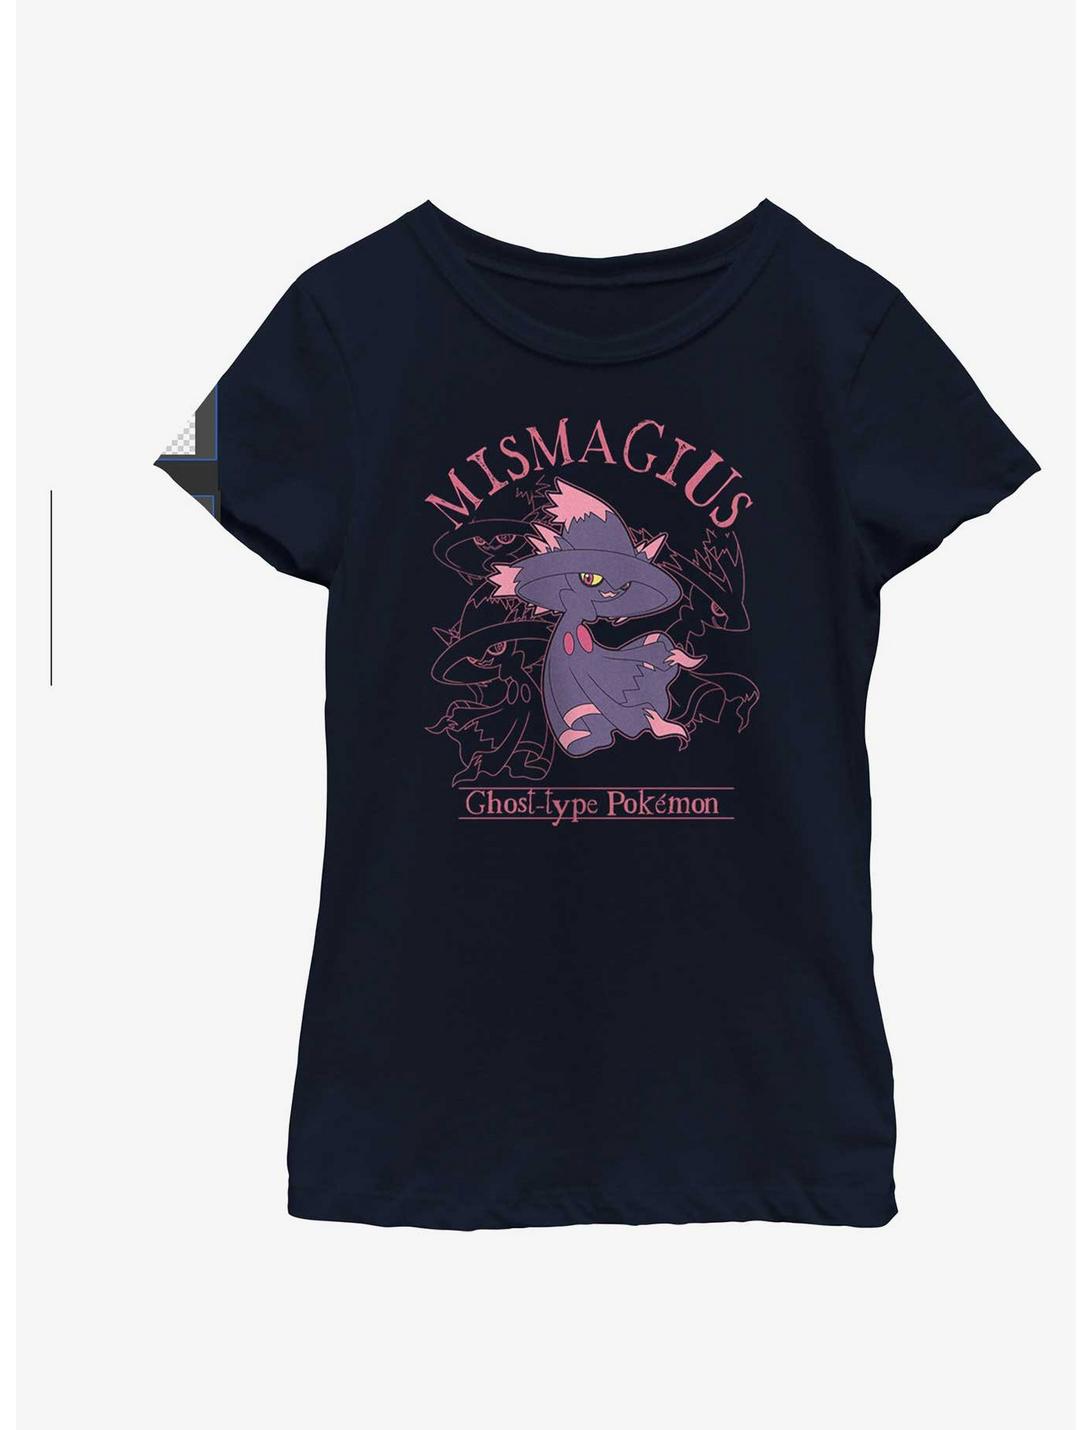 Pokemon Mismagius In The Woods Youth Girls T-Shirt, NAVY, hi-res